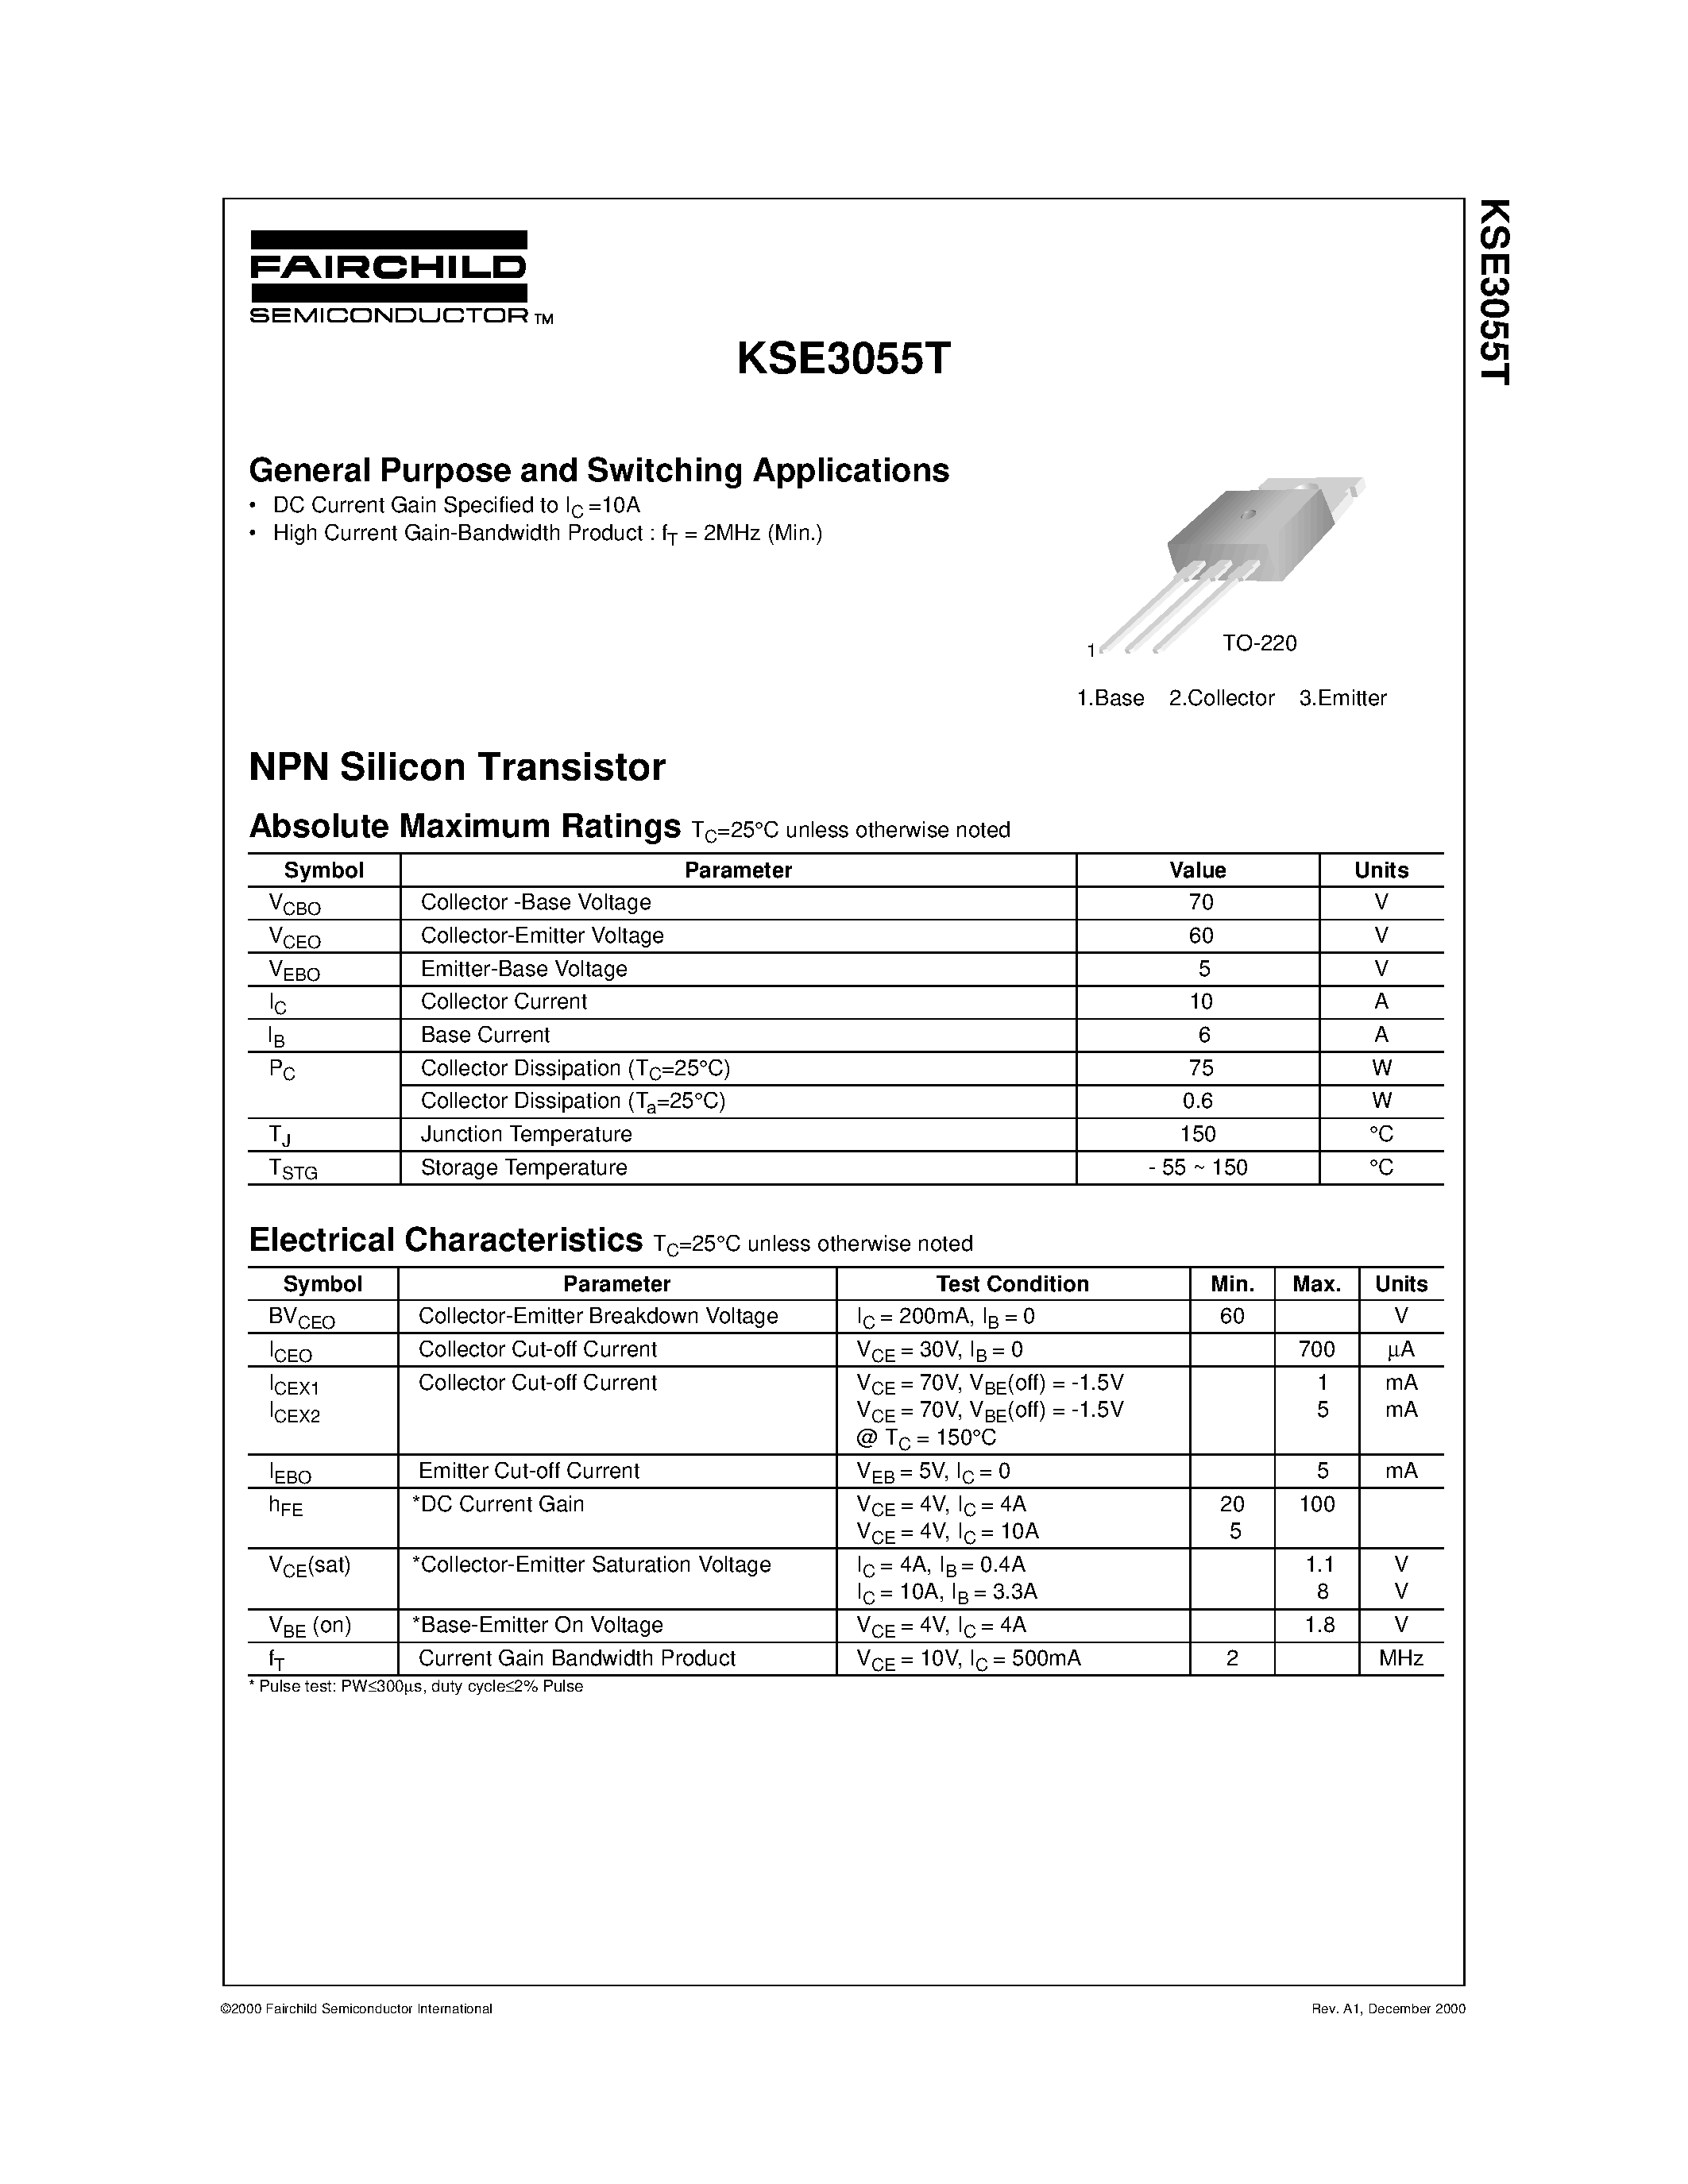 Datasheet KSE3055T - General Purpose and Switching Applications page 1